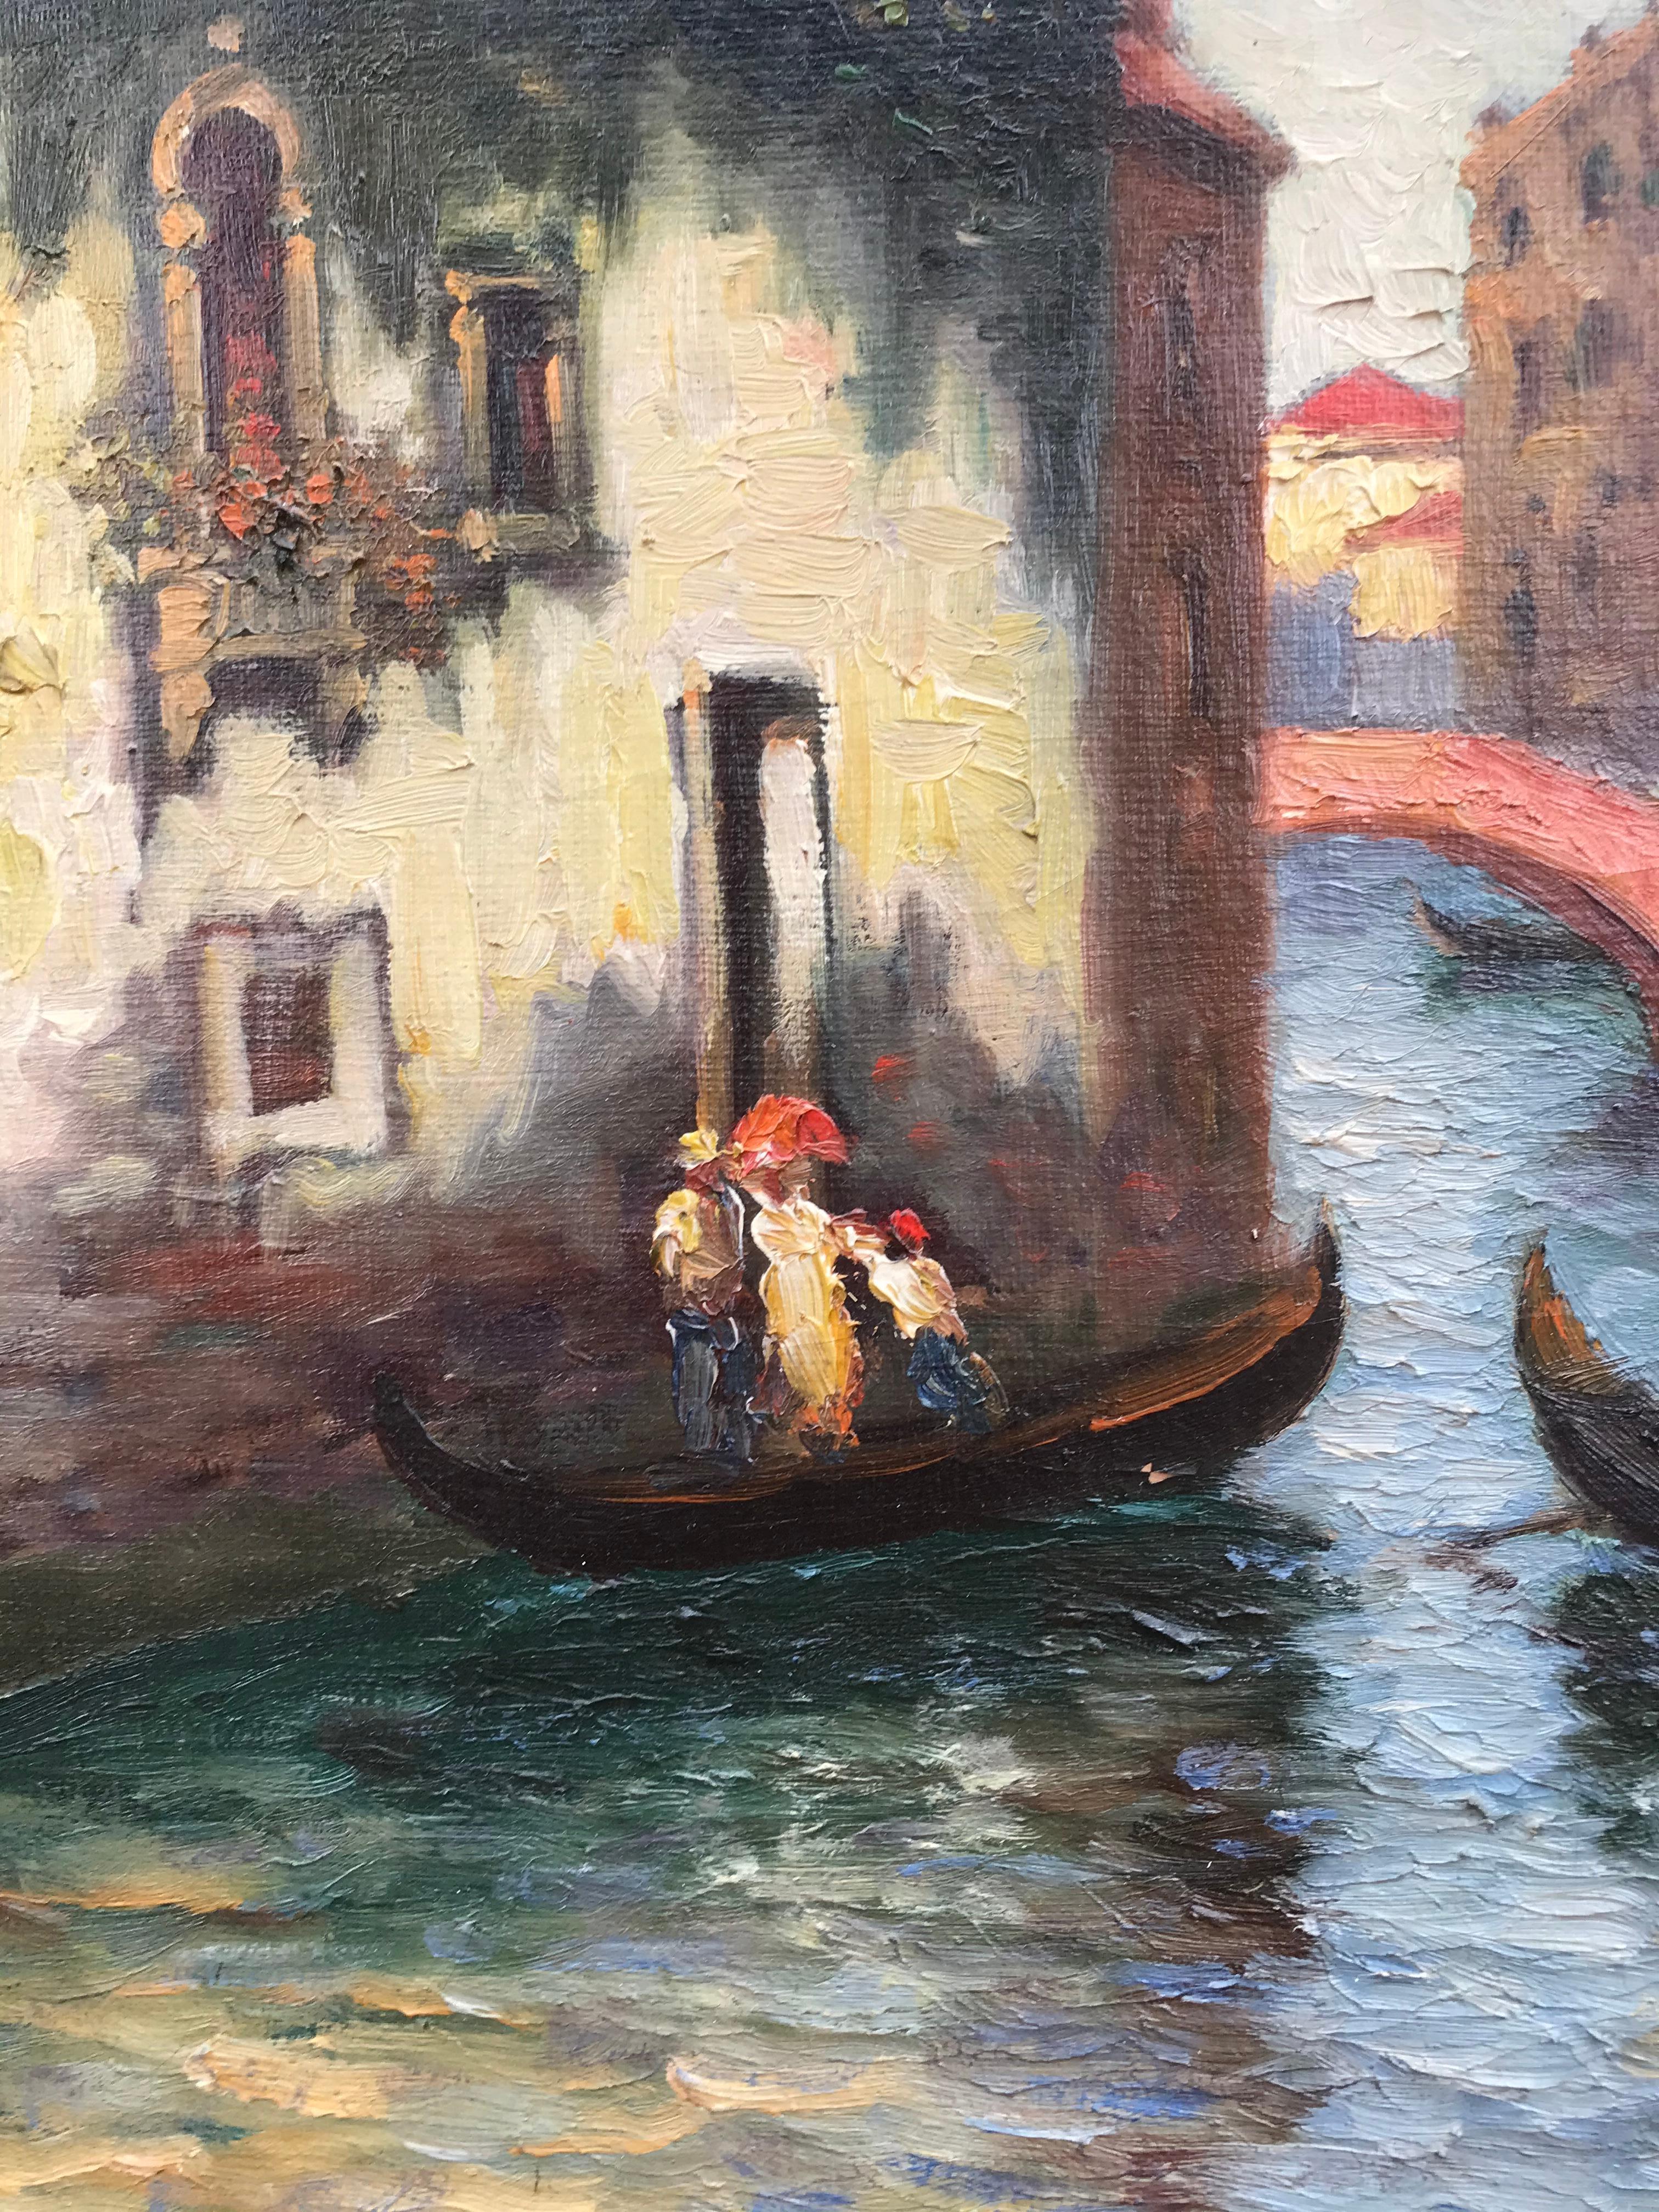 Original oil on canvas painting by Richard Dey DeRibcowsky of the gondolas of Venice, Italy. Vibrant, strong colors make this artist’s work highly collected. Signed by the artist lower right. Overall in original Arts and Craft gold leaf frame 31.5